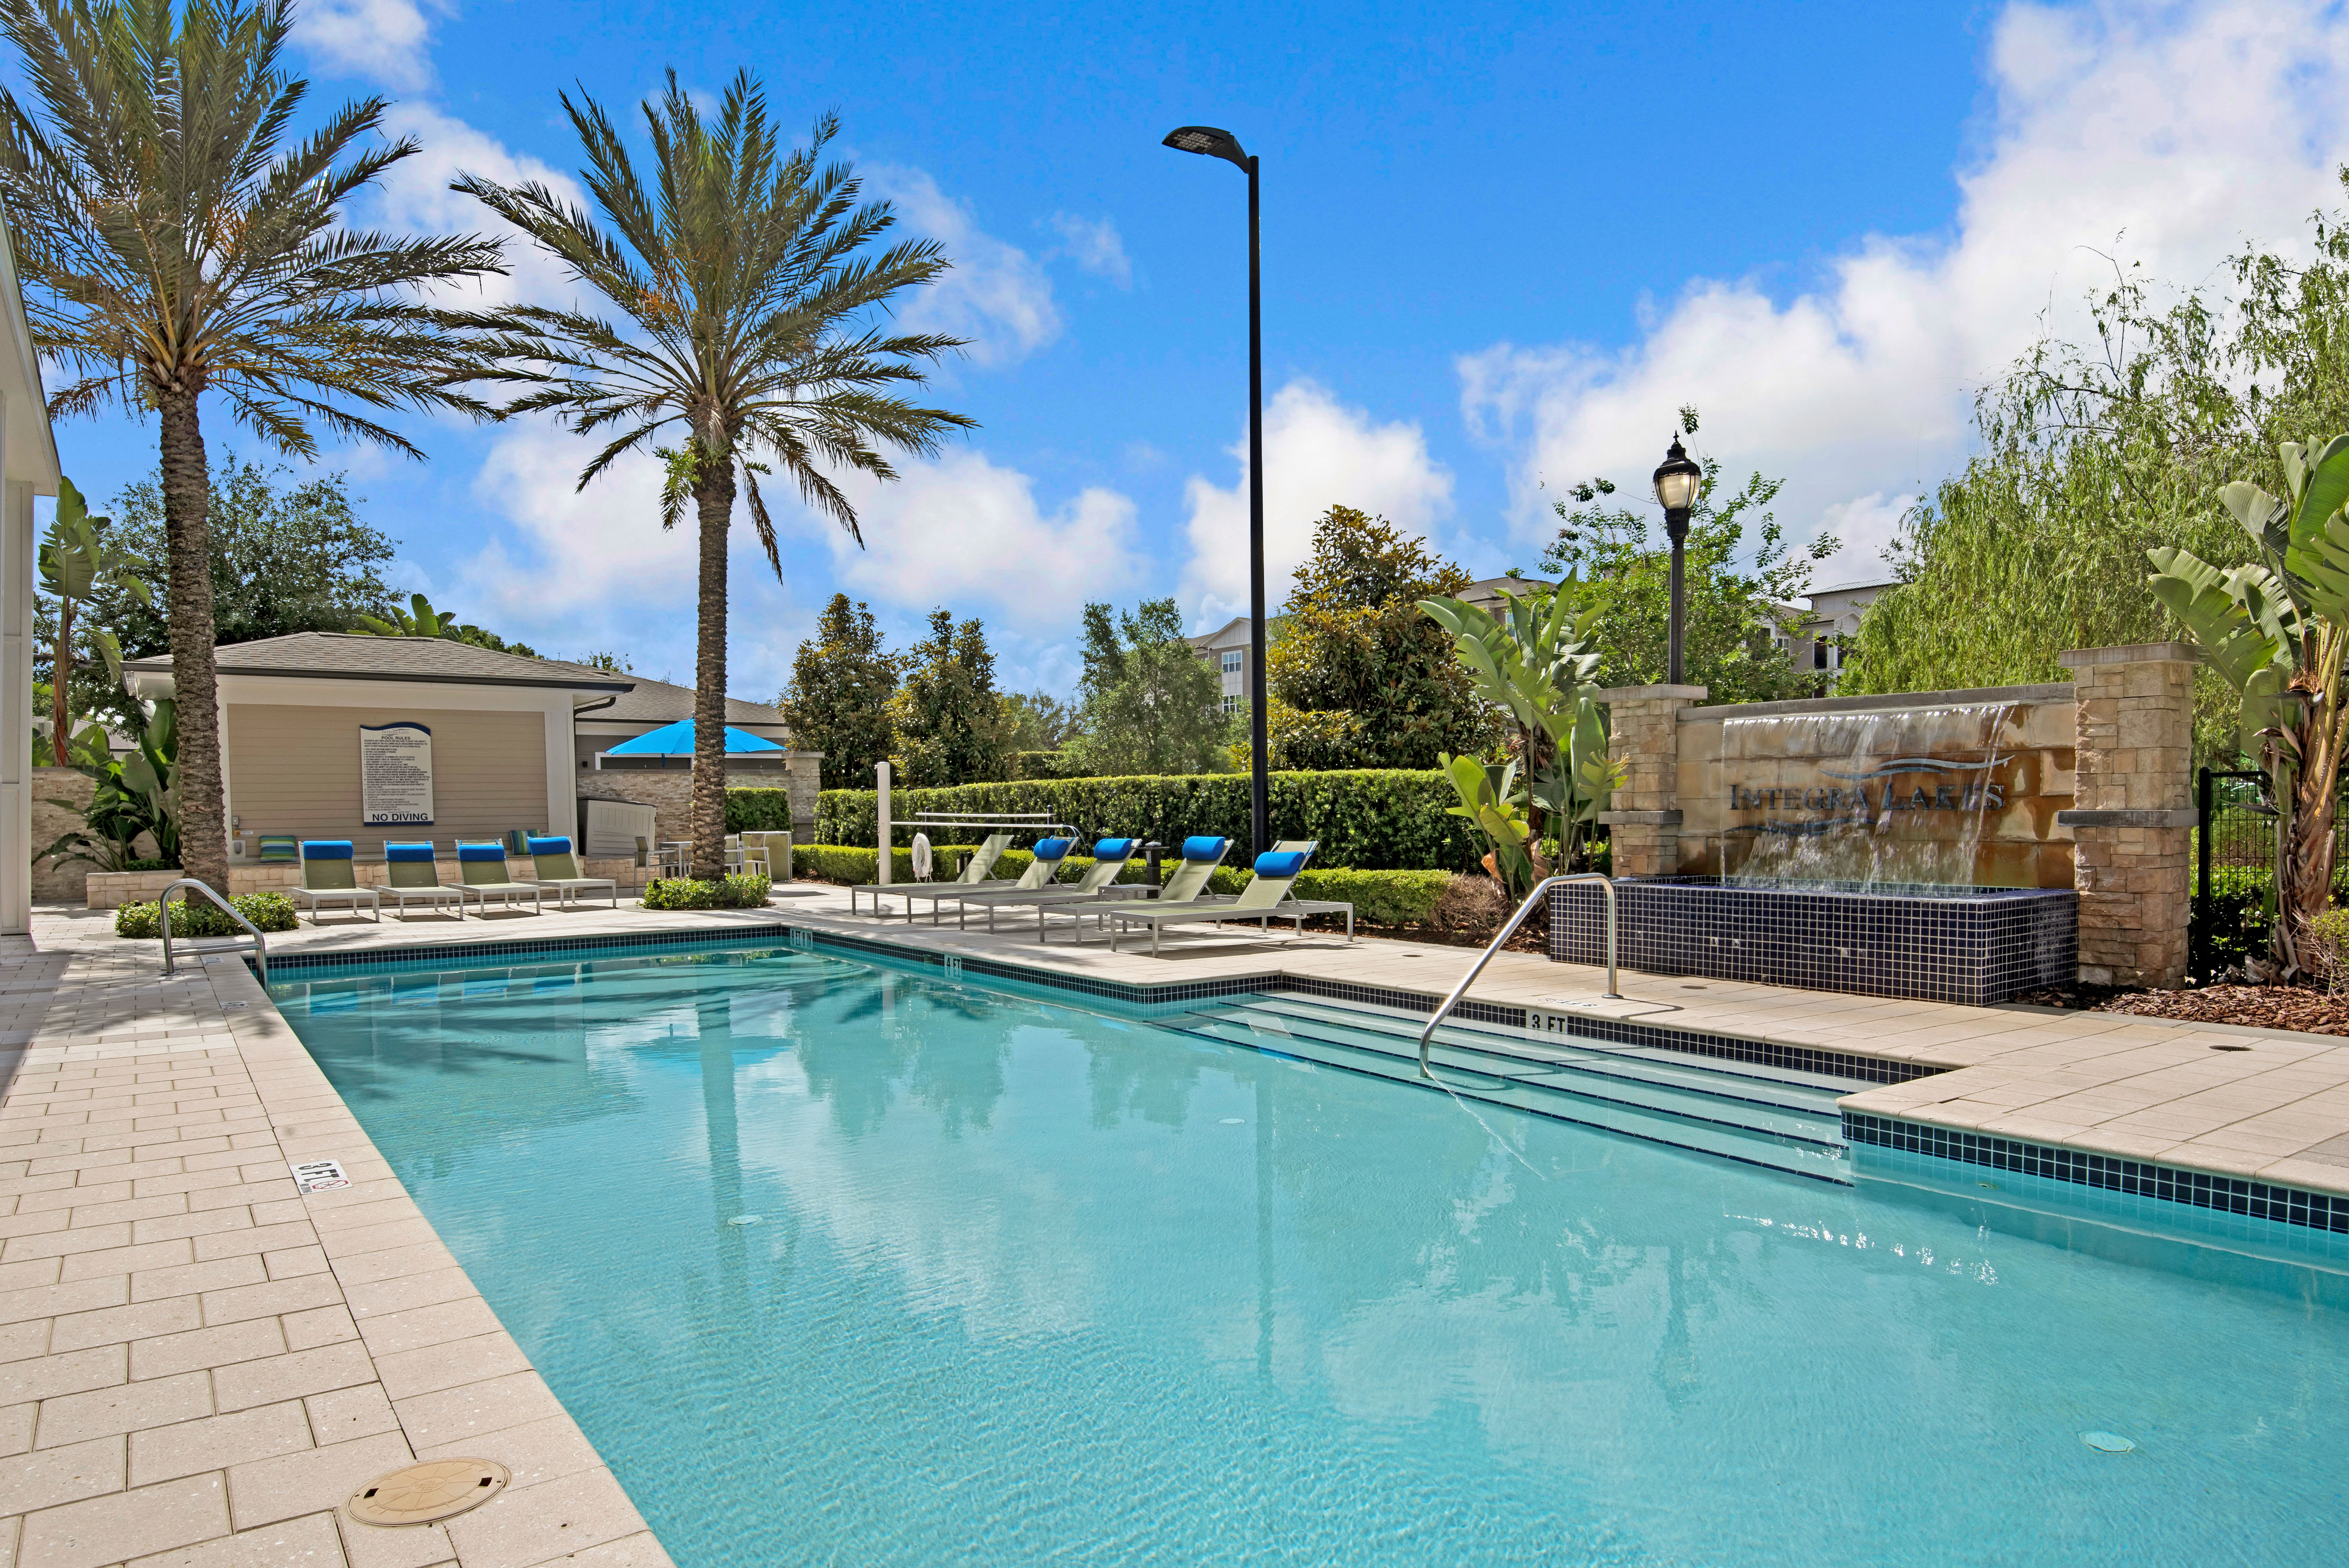 Outdoor pool at Integra Lakes in Casselberry, Florida